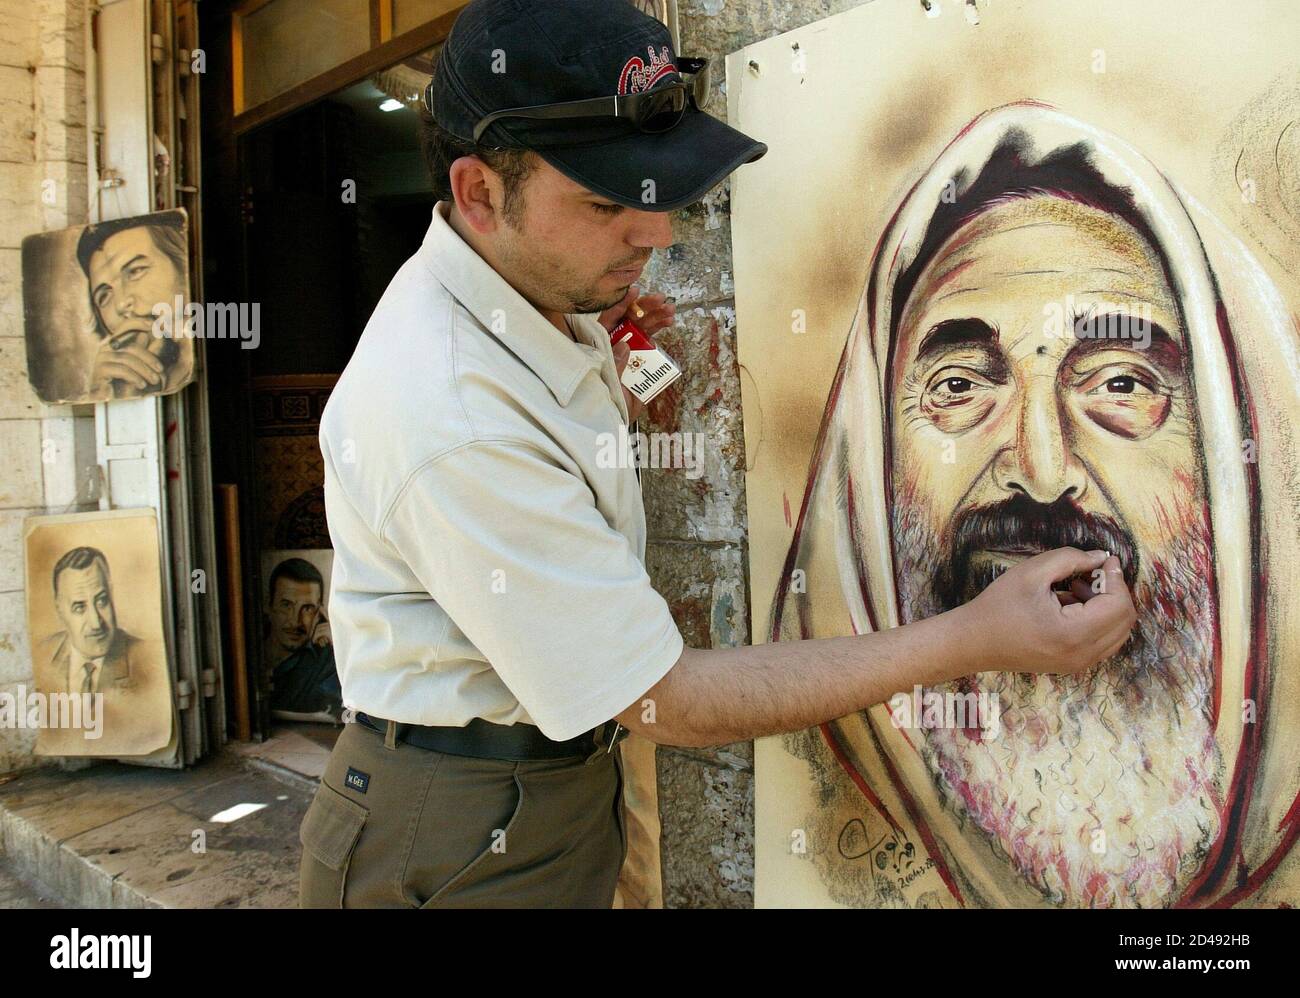 Palestinian artist Walid Ayoub sketches a portrait of the assassinated  spiritual leader of Hamas Sheikh Ahmed Yassin, in the West Bank city of  Ramallah April 12, 2004. The Middle East, overshadowed by